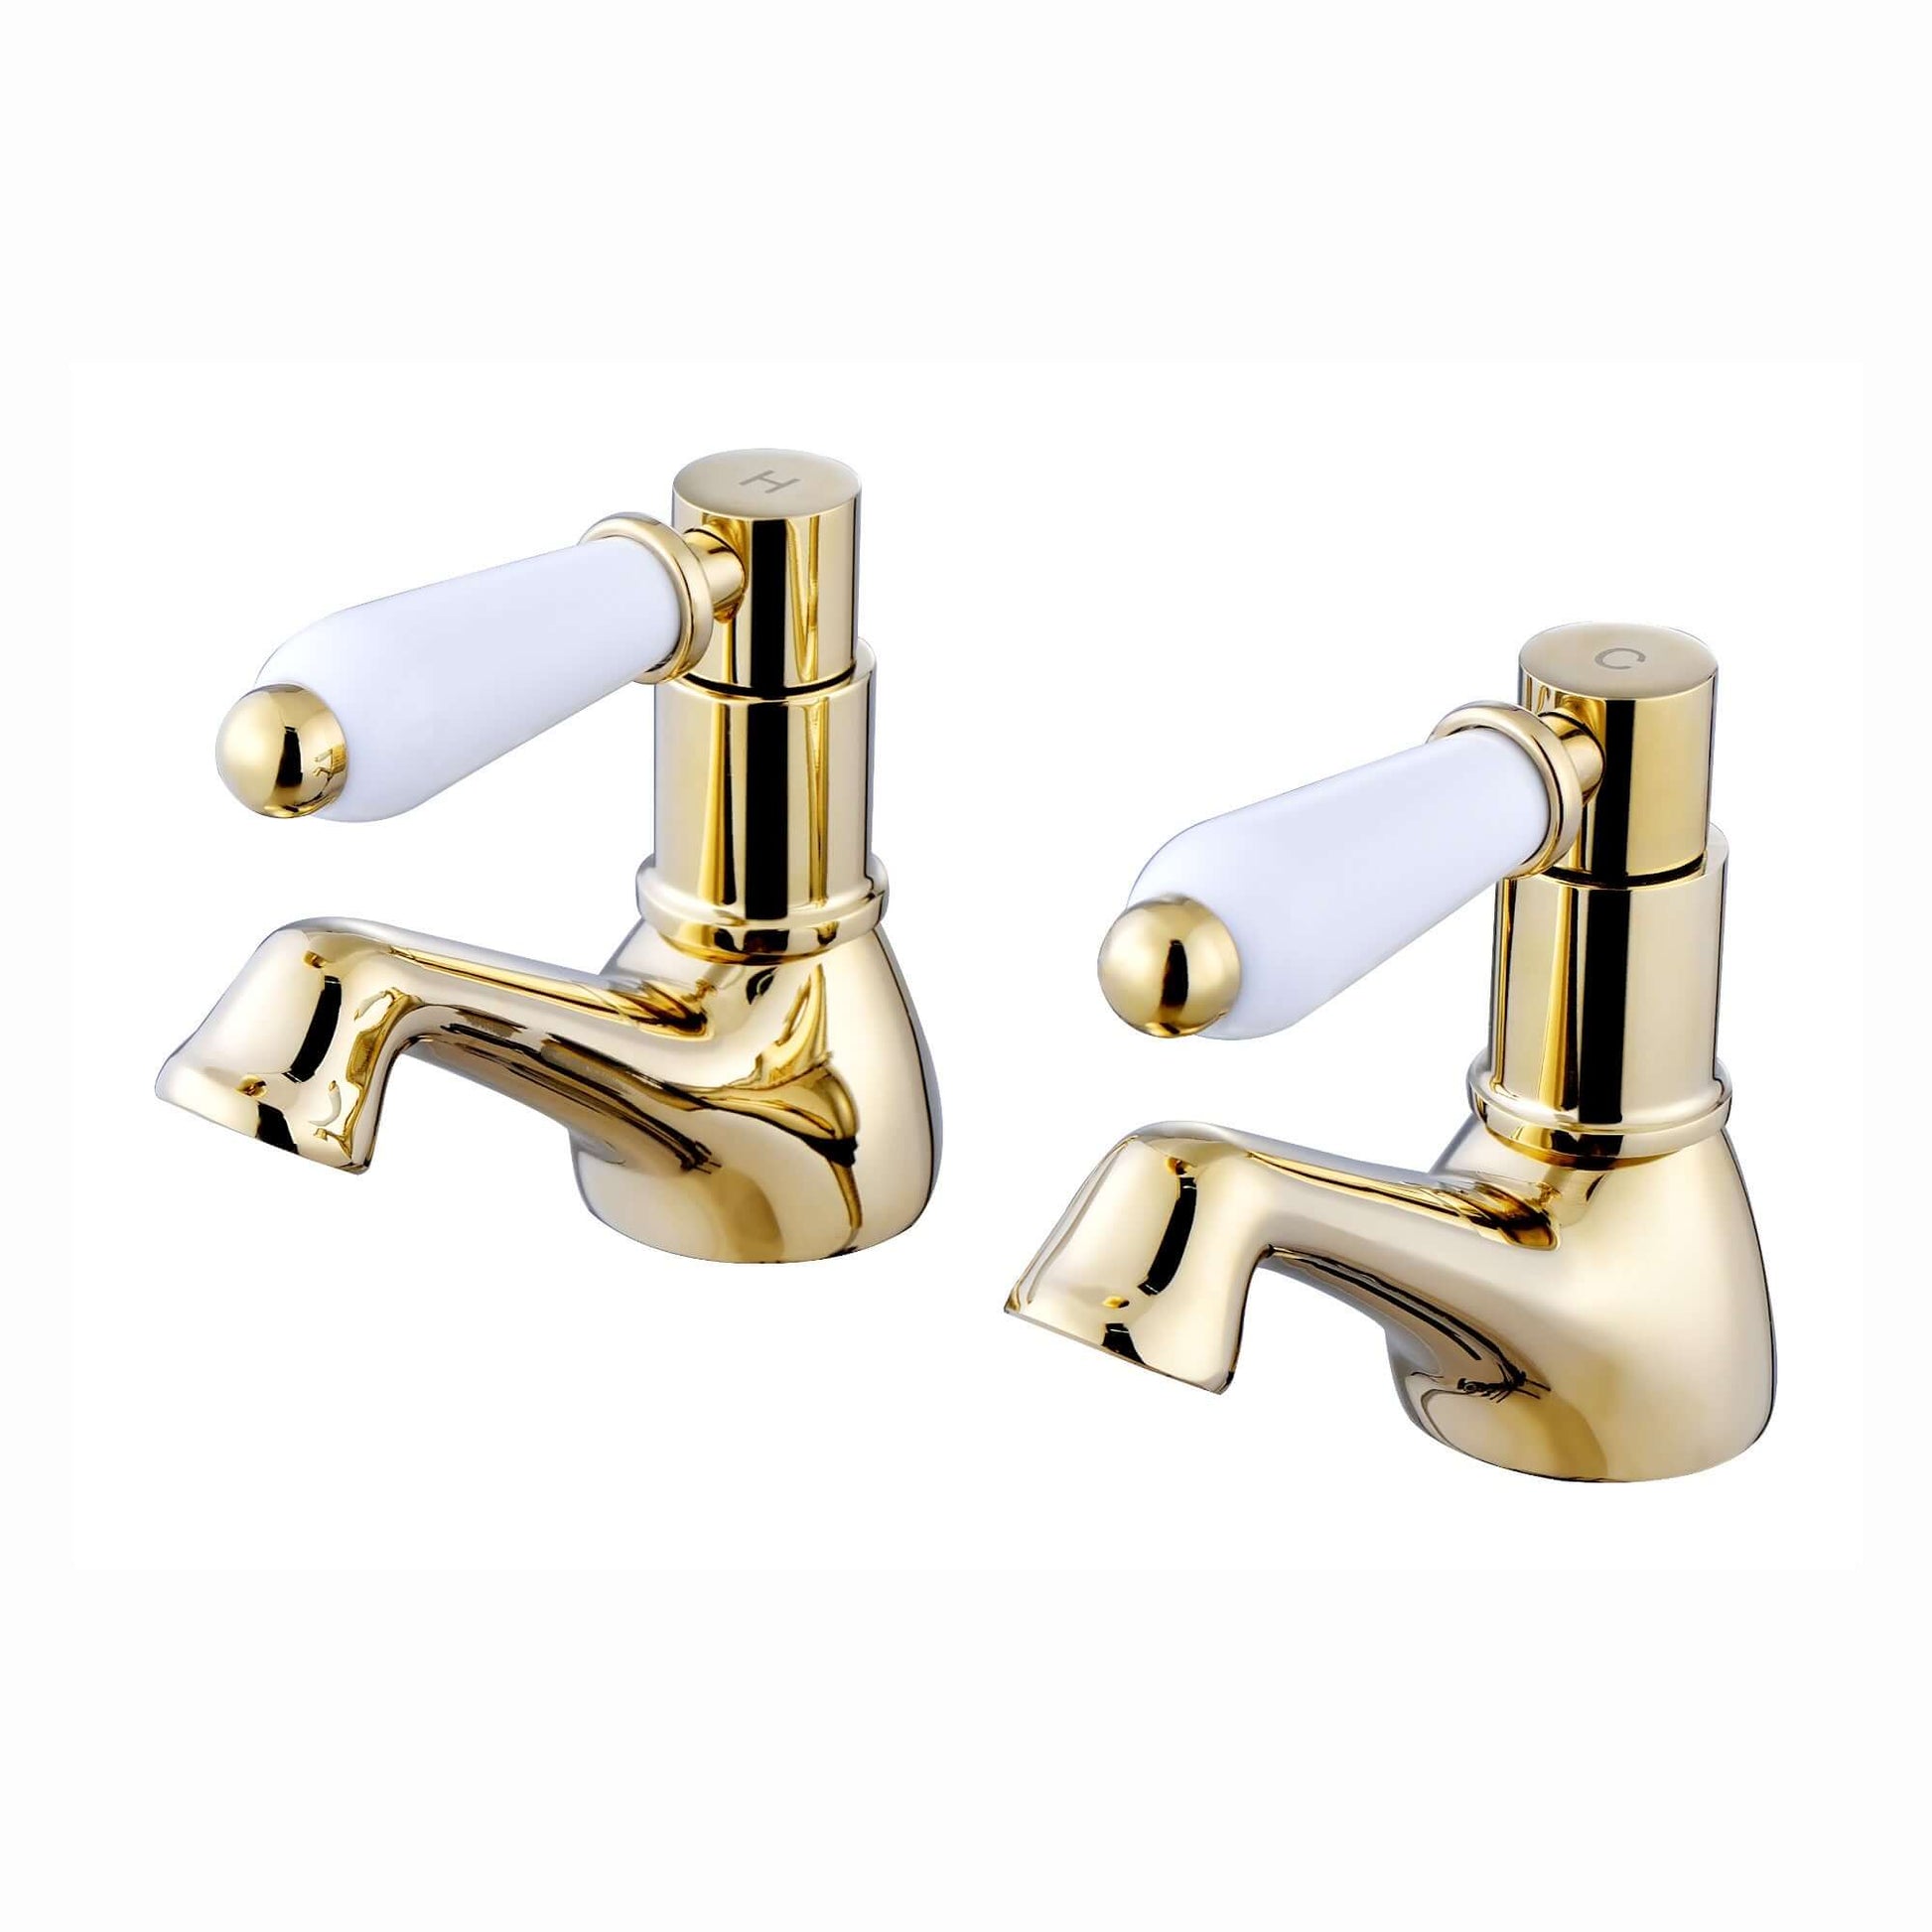 Downton hot and cold basin taps with white ceramic levers - English gold - Taps